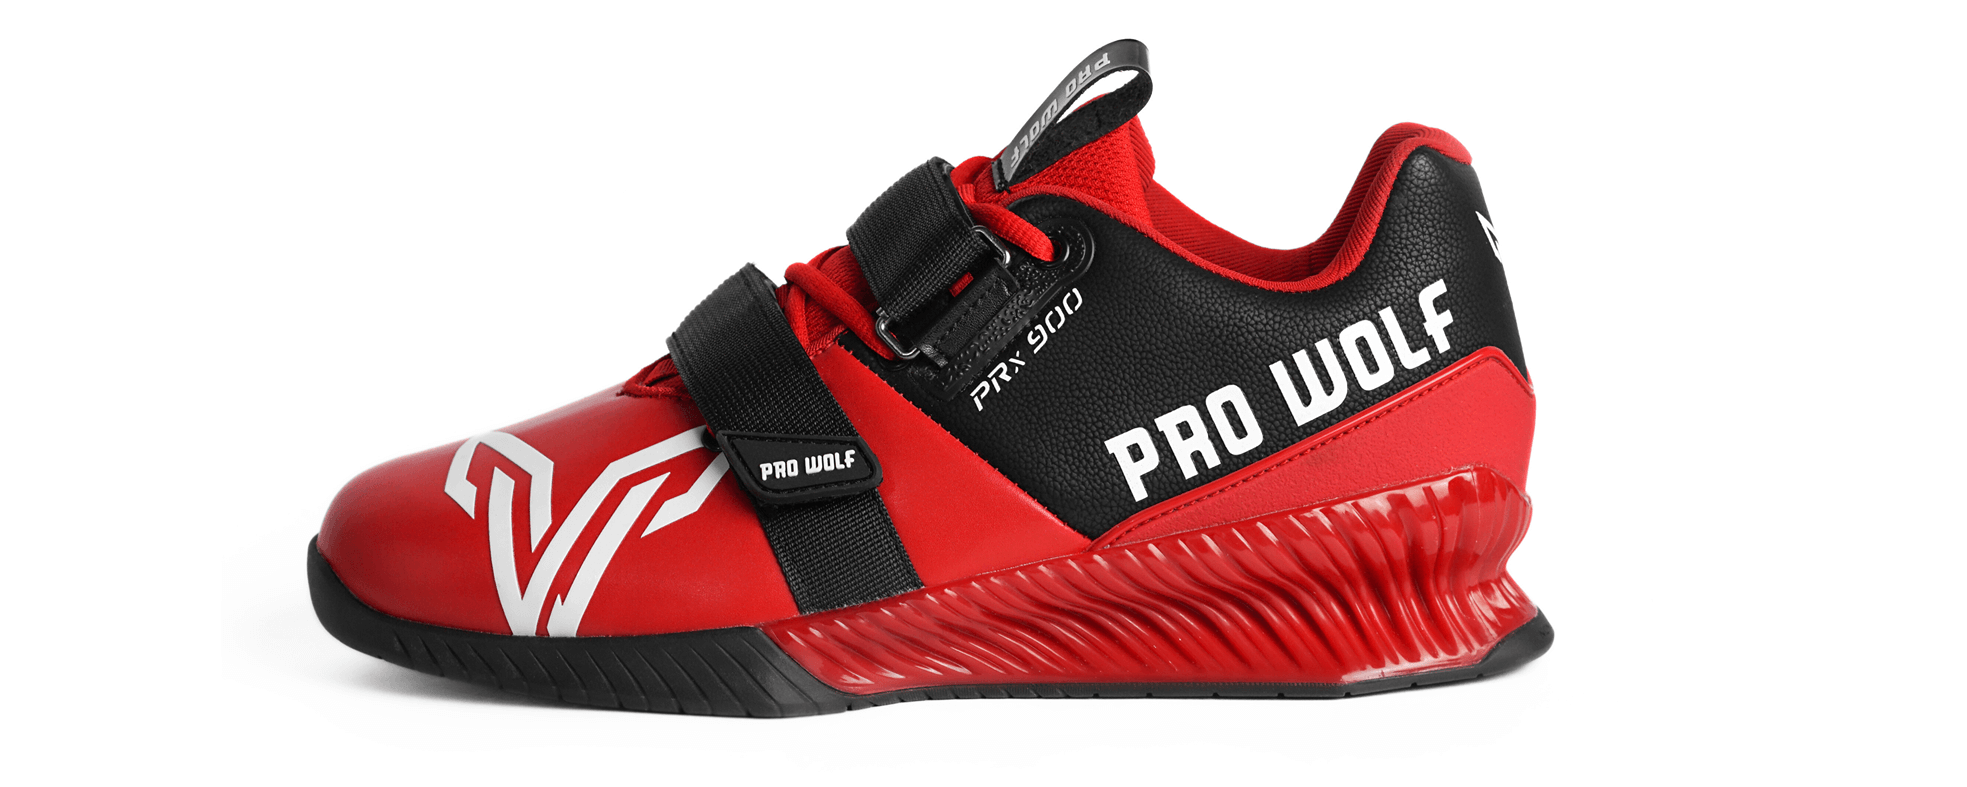 Red Pro Wolf weight Lifting shoes